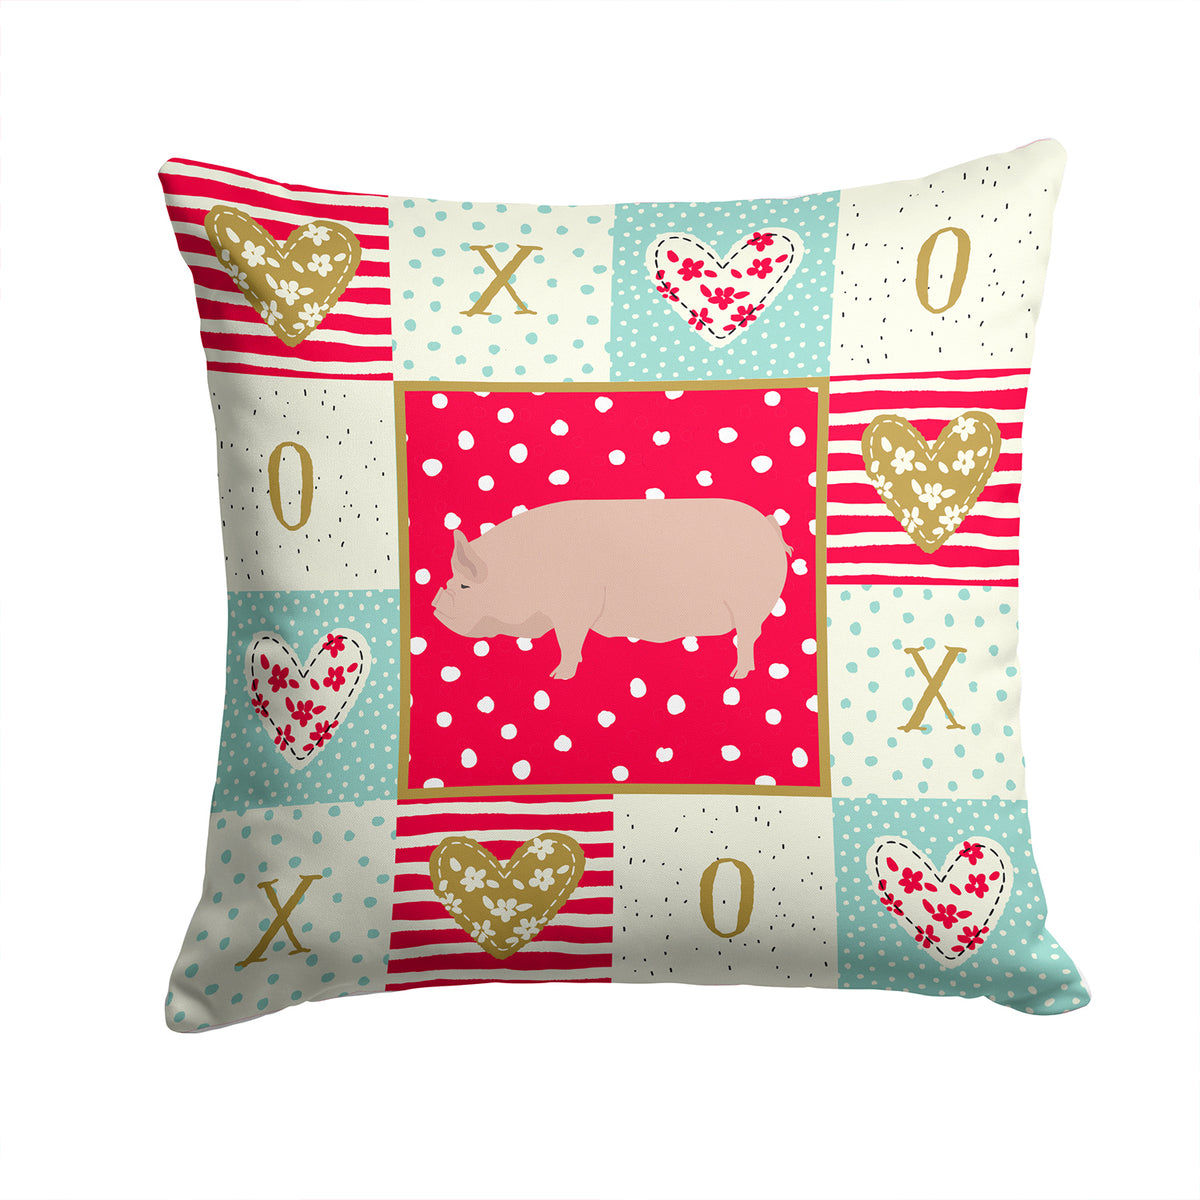 Welsh Pig Love Fabric Decorative Pillow CK5364PW1414 - the-store.com